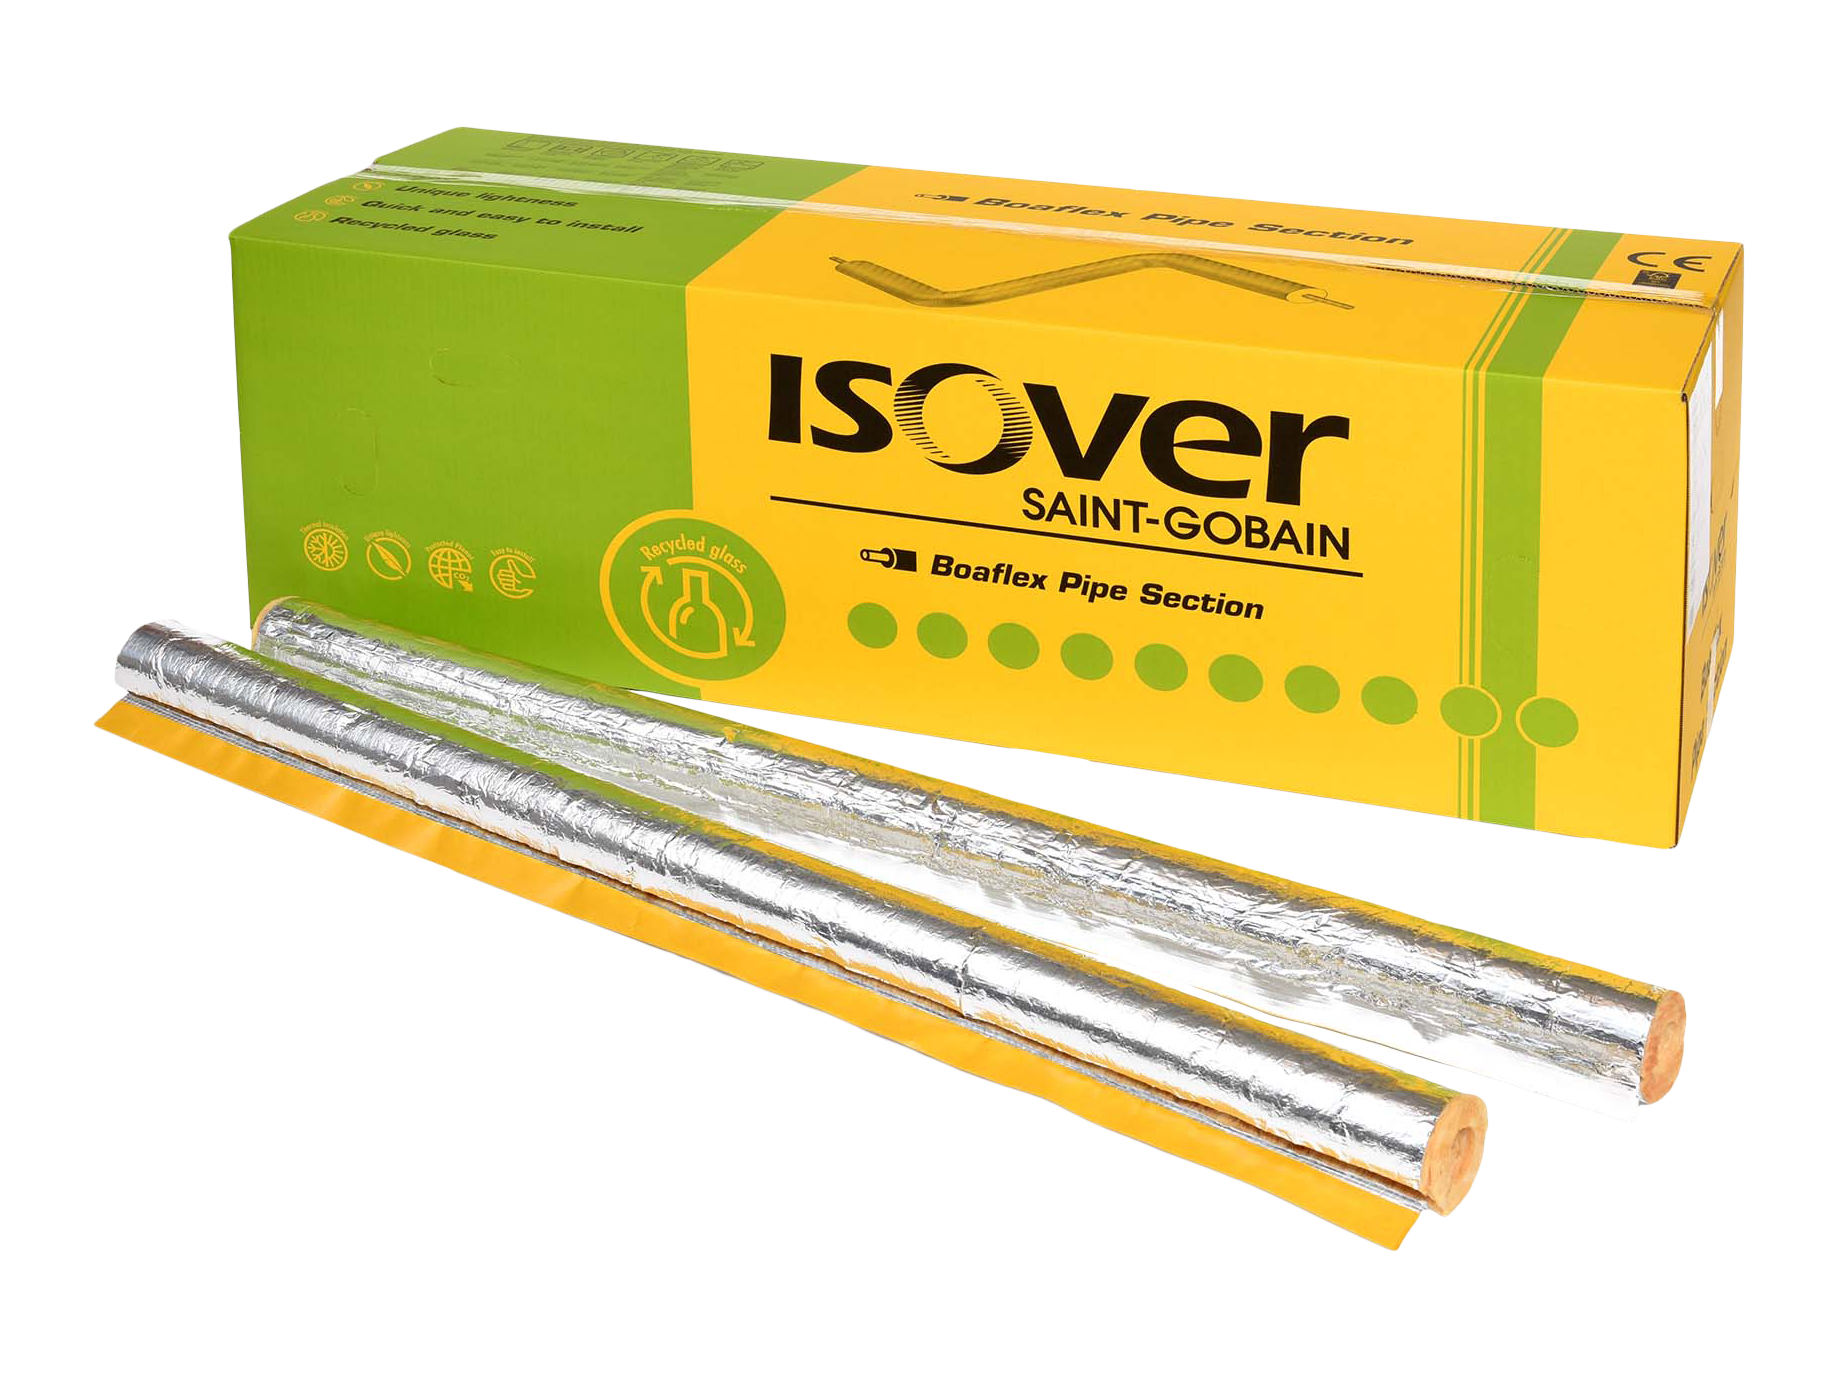 ISOVER Boaflex Pipe Section 48/50